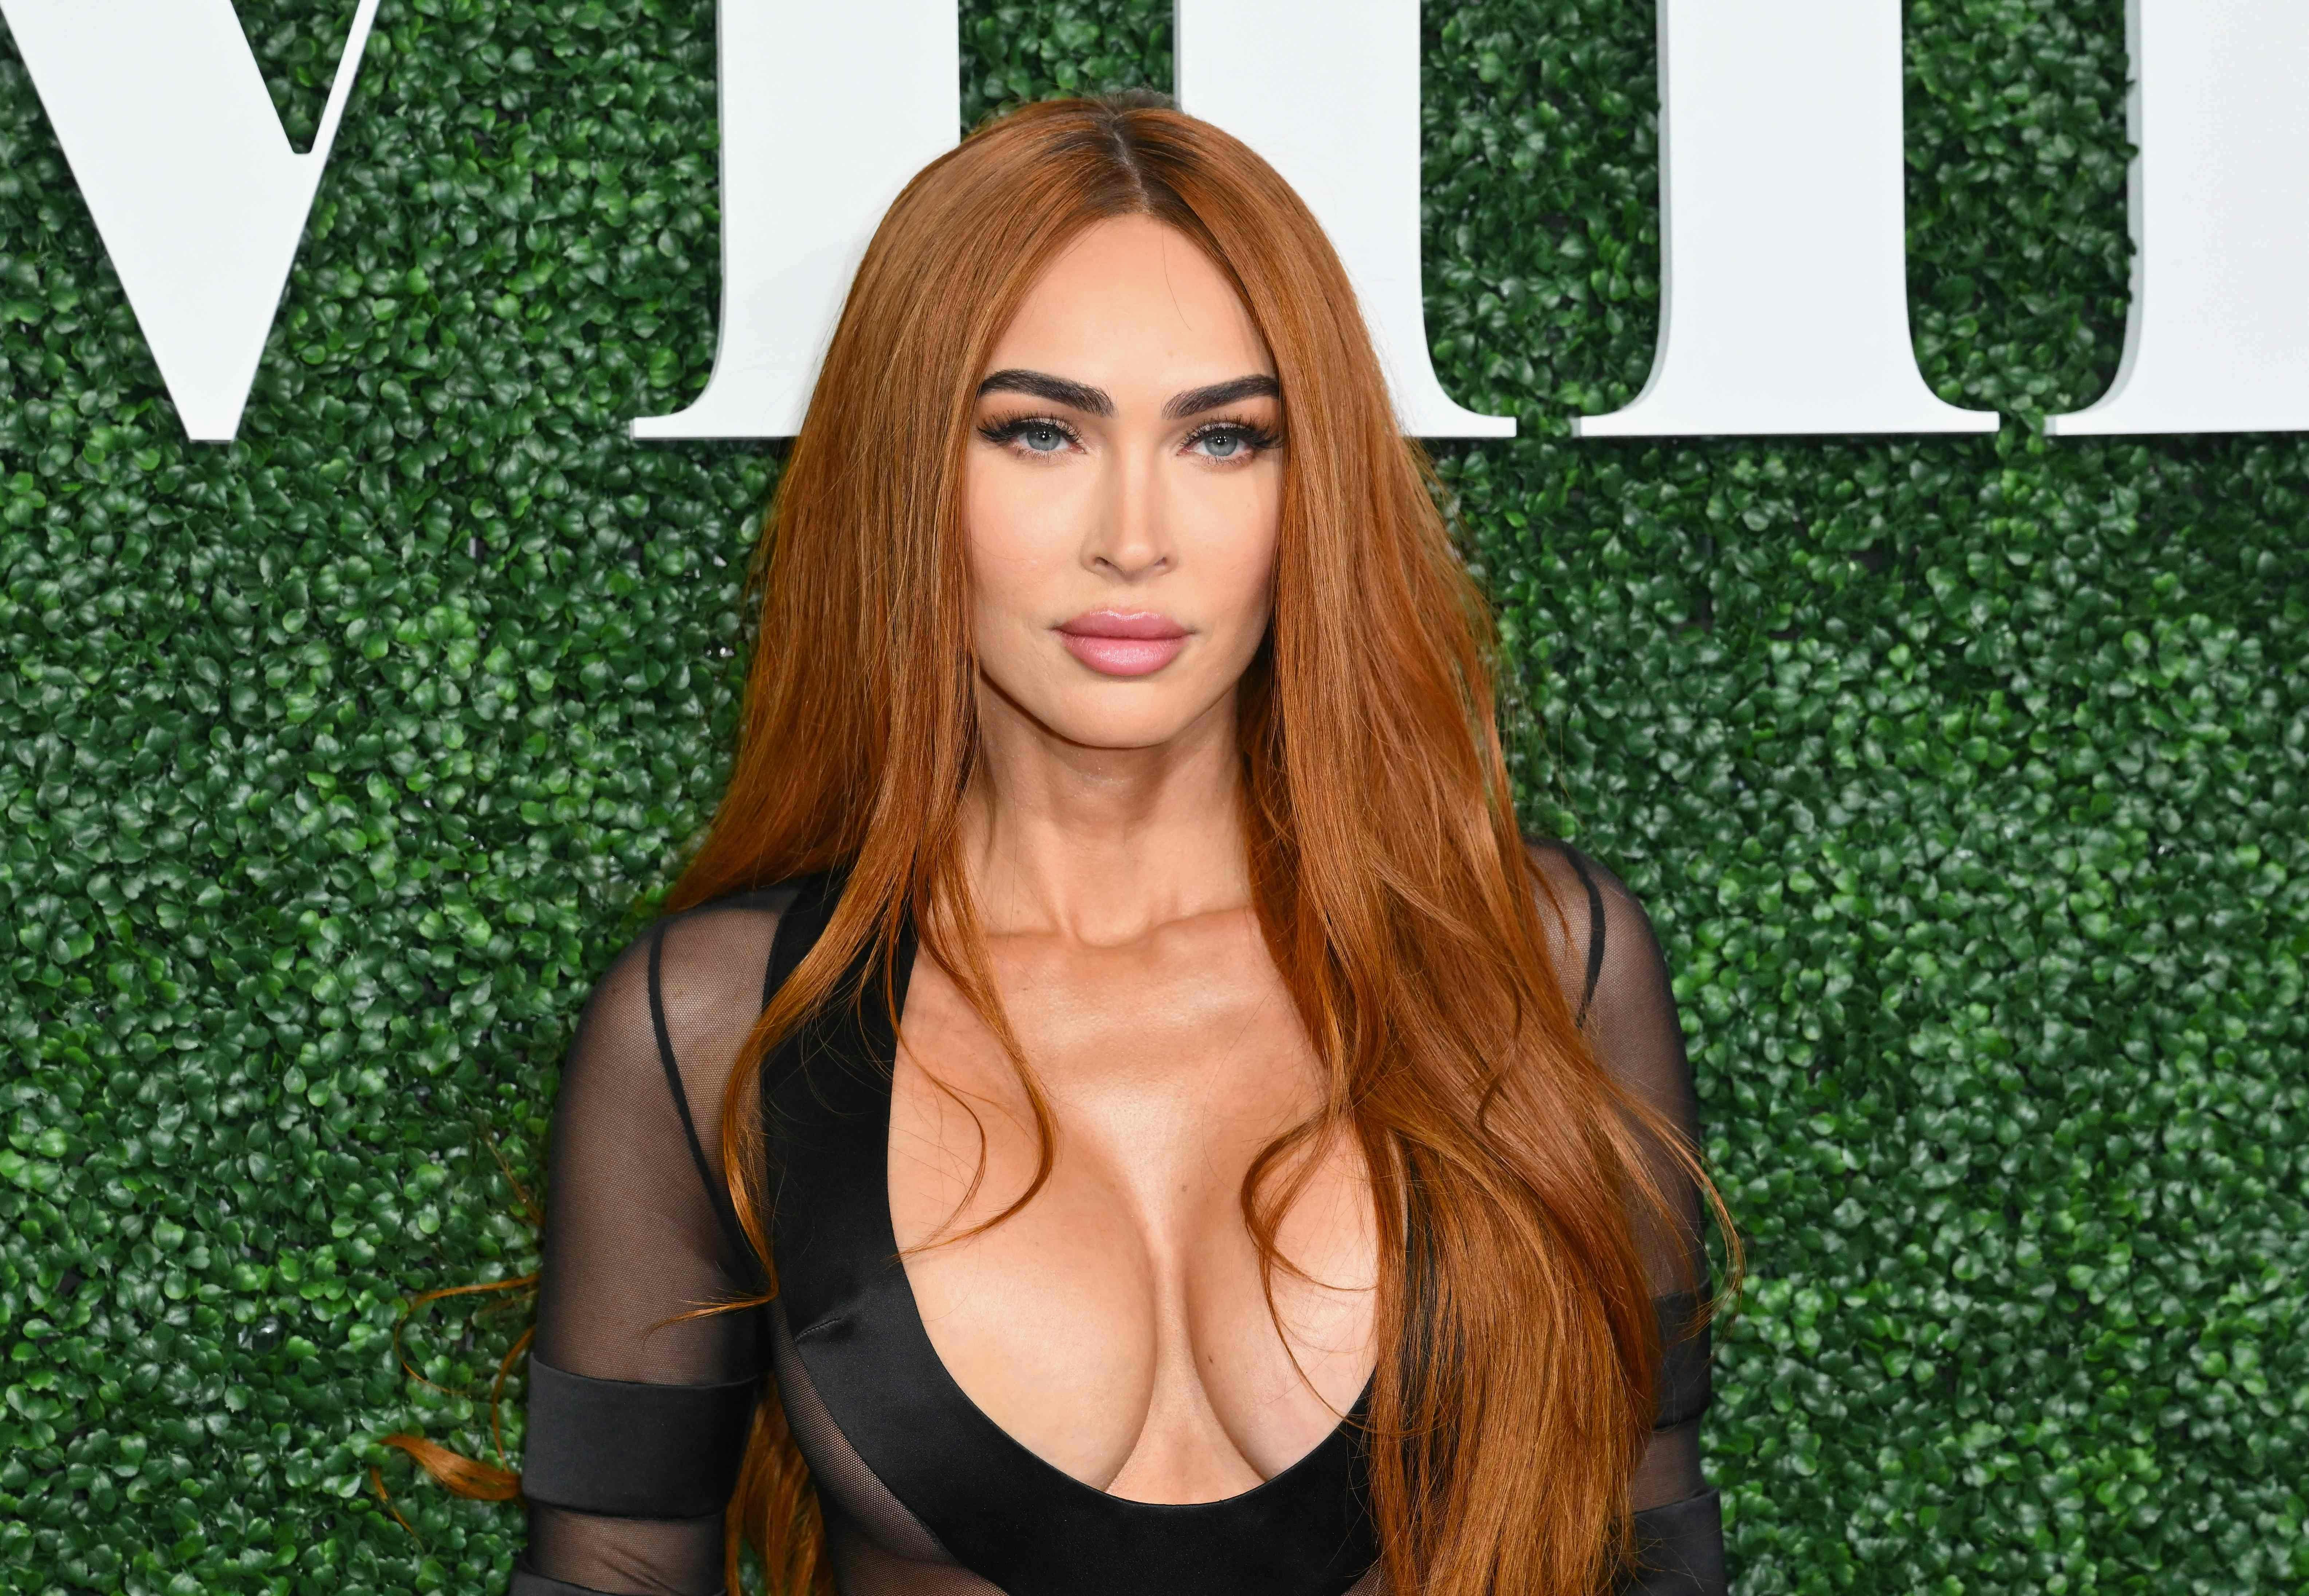 US actress Megan Fox arrives for the 2023 Sports Illustrated swimsuit issue launch party at Hard Rock Hotel Times Square in New York City on May 18, 2023. (Photo by ANGELA WEISS / AFP)